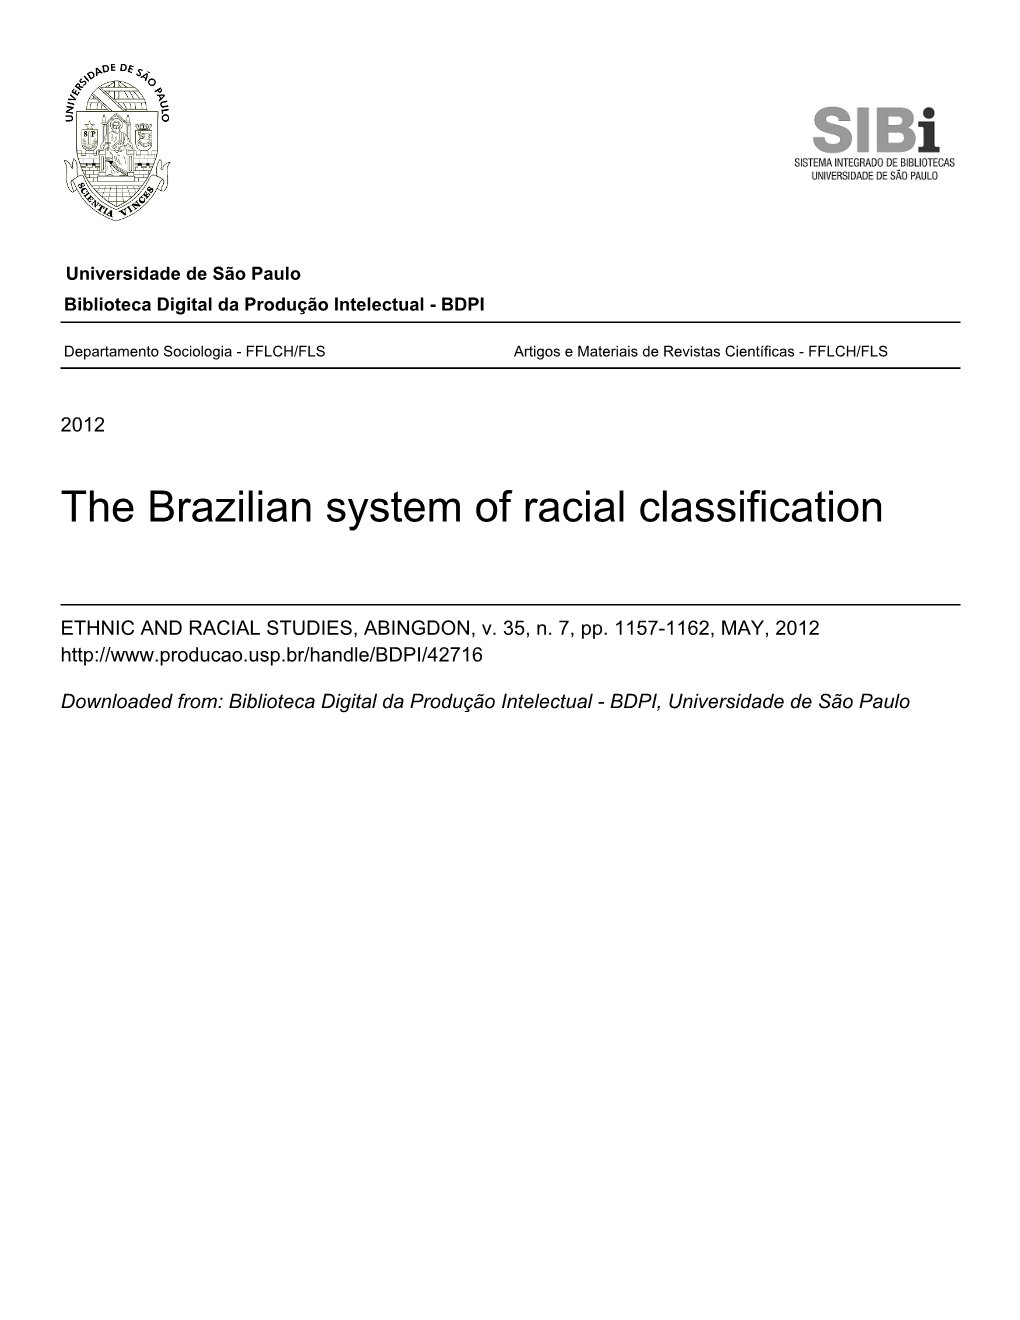 The Brazilian System of Racial Classification